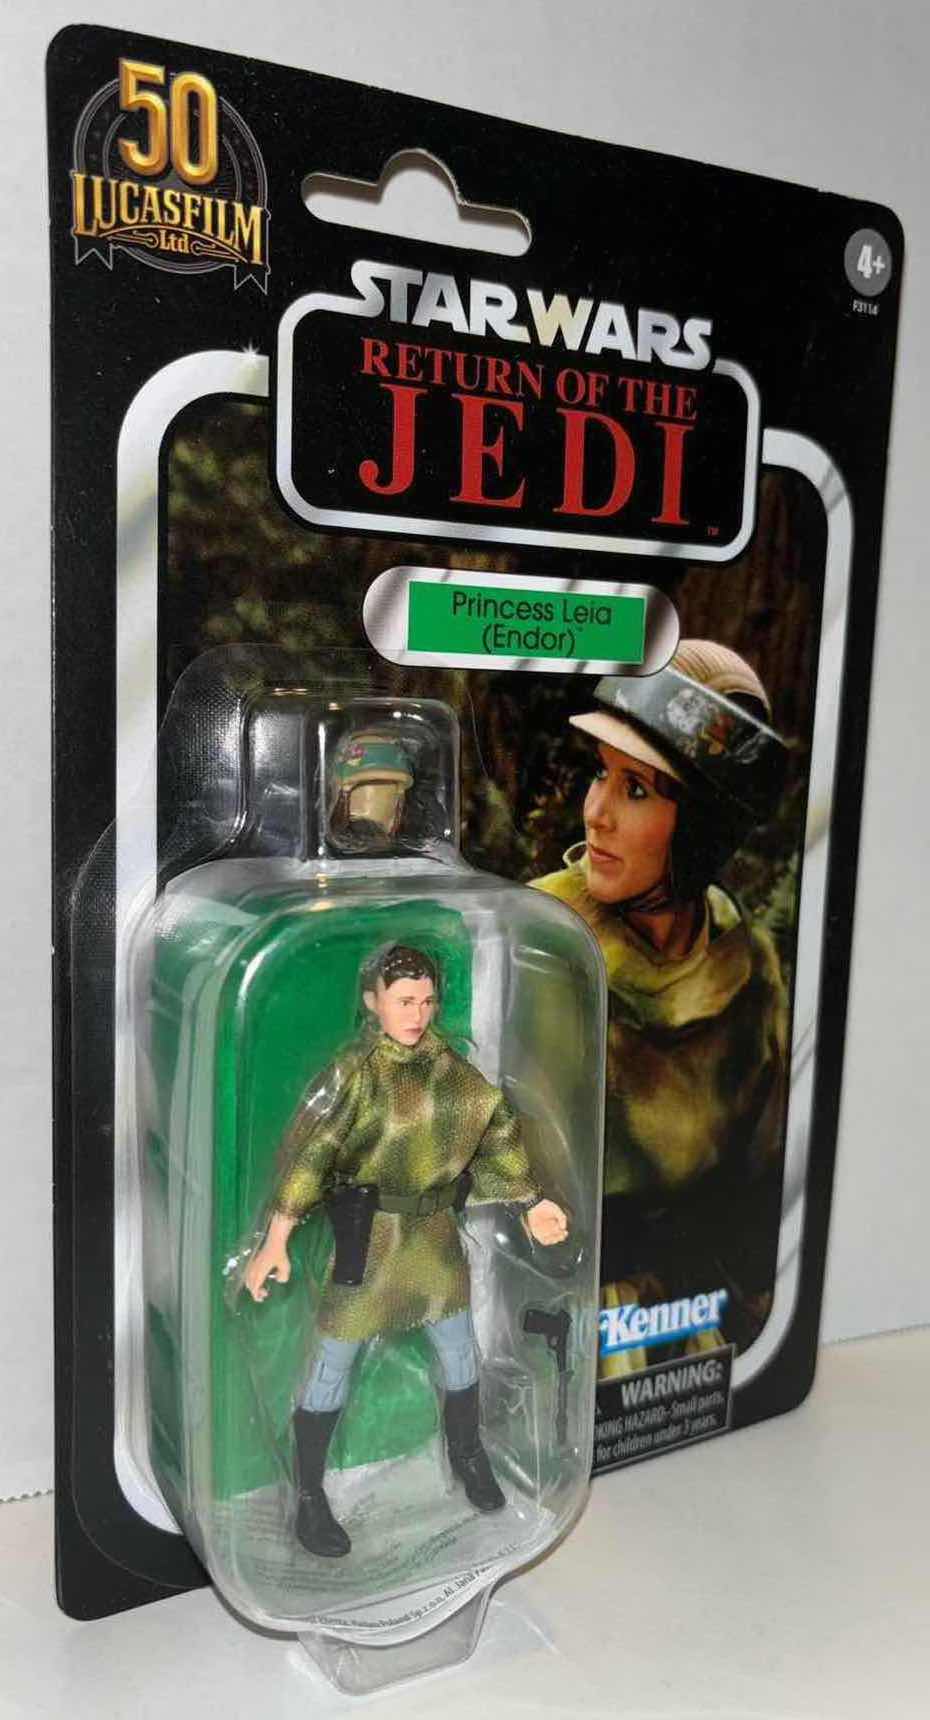 Photo 1 of NEW STAR WARS RETURN OF THE JEDI 3.75” THE VINTAGE COLLECTION ACTION FIGURE & ACCESSORIES, “PRINCESS LEIA (ENDOR)” (1)